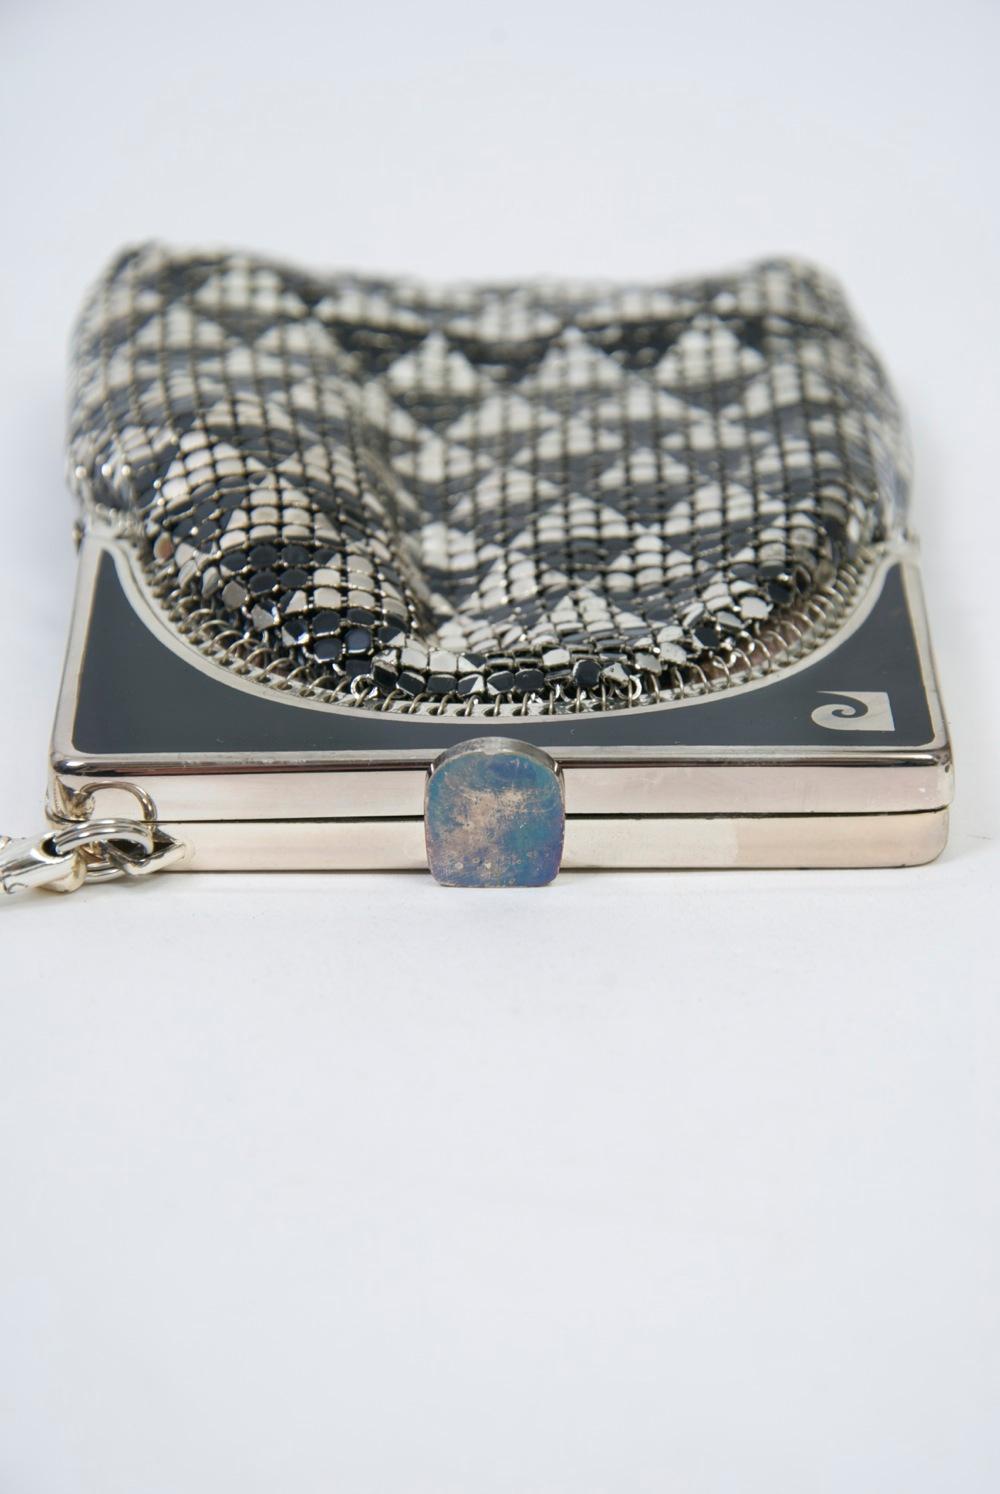 Pierre Cardin Silver and Black Mesh Evening Bag 4